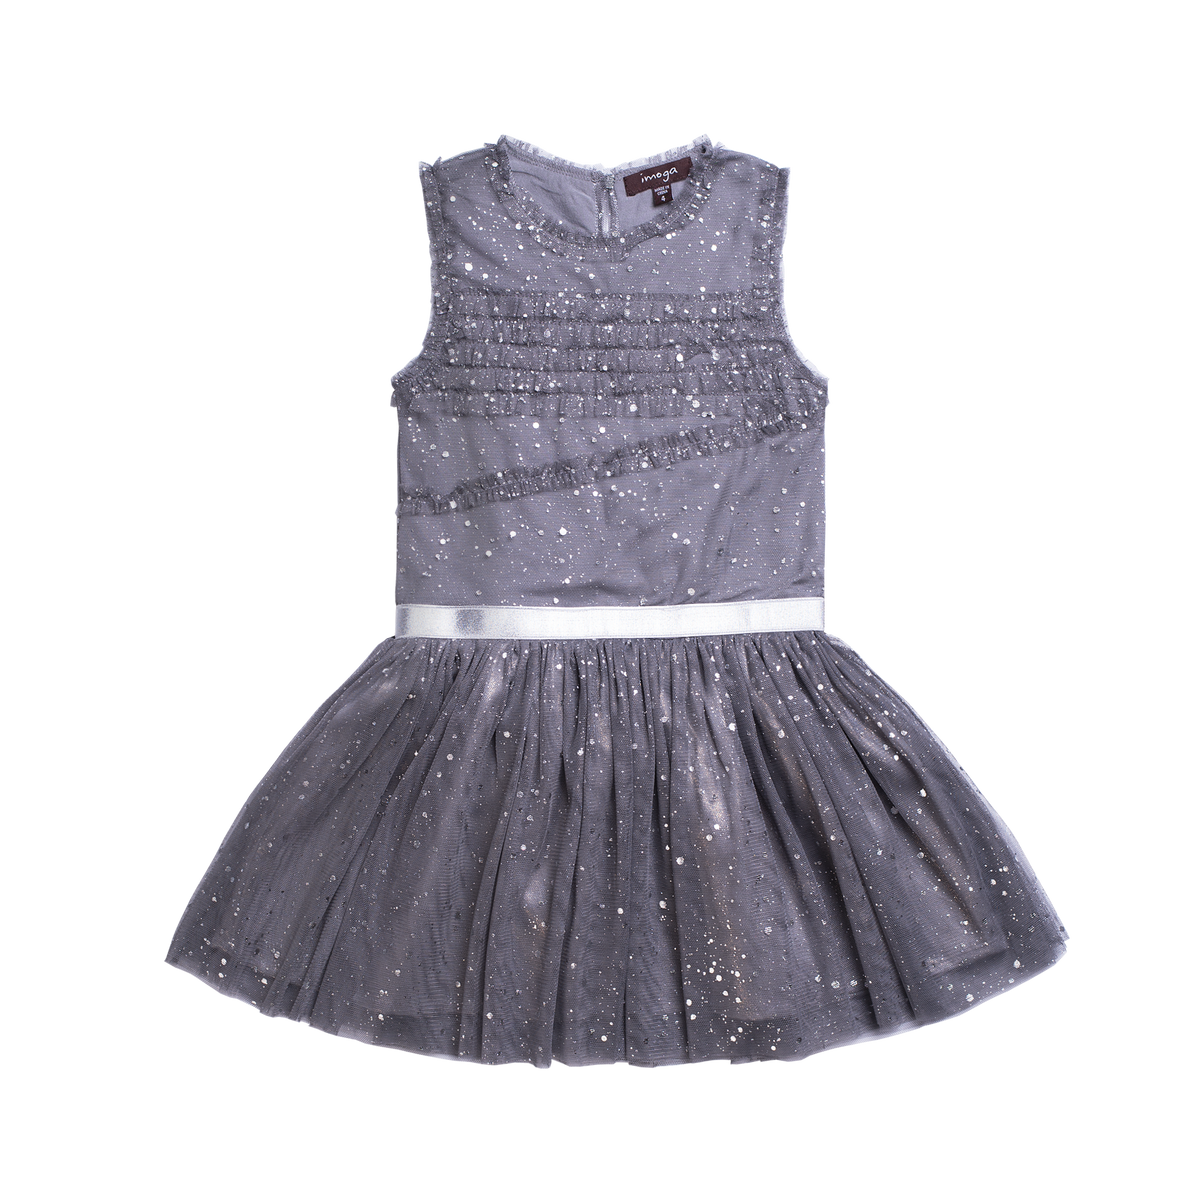 Little girls sleeveless grey party dress with a tutu skirt and shimmer throughout. A silver strap lines the waist for finished look. Dress made by Imoga.